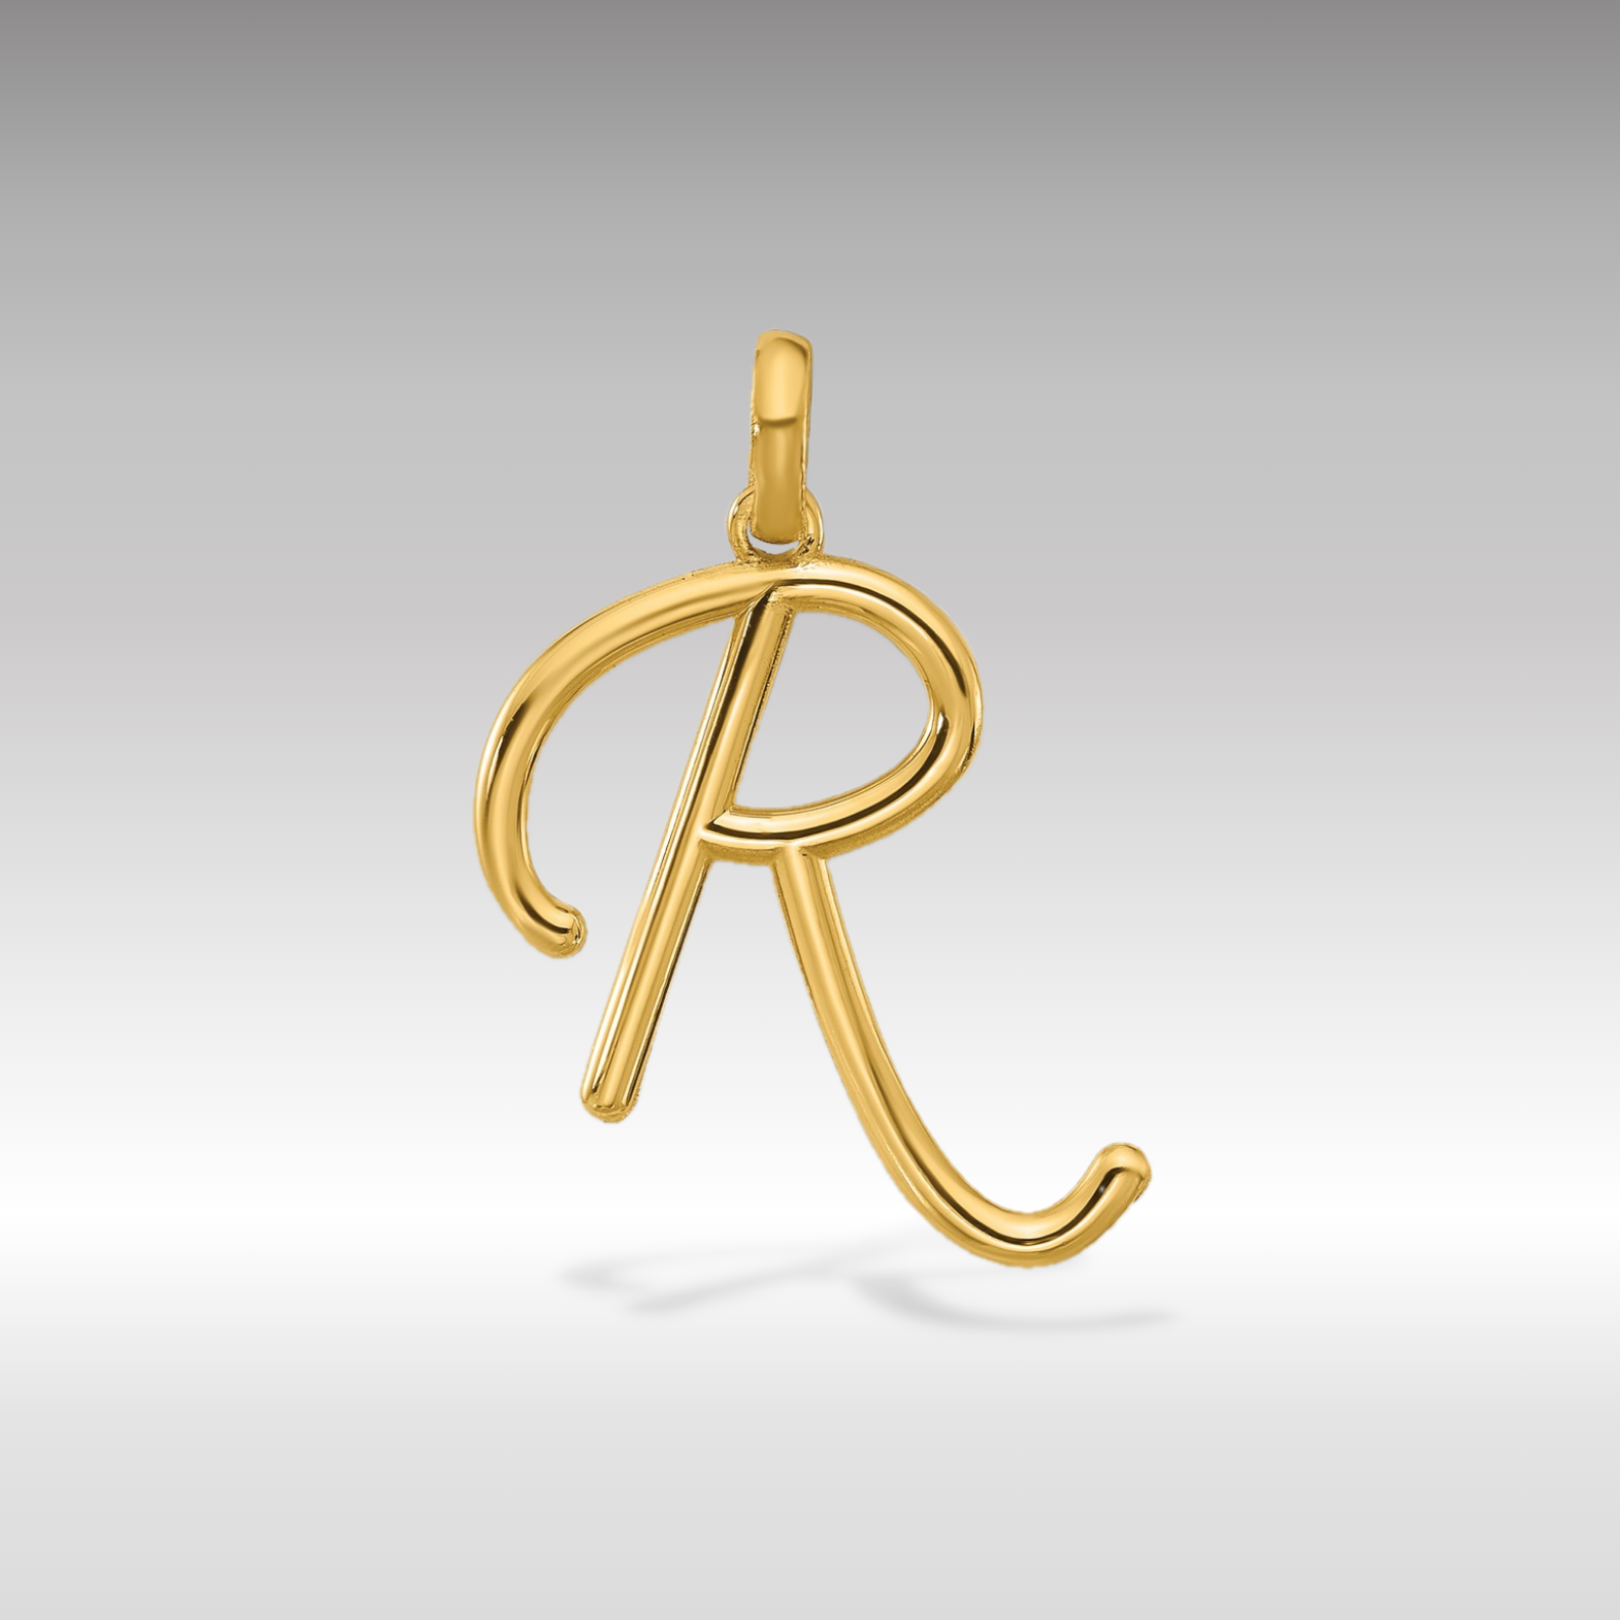 14K Gold Fancy Letter 'R' Charm Pendant - Charlie & Co. Jewelry